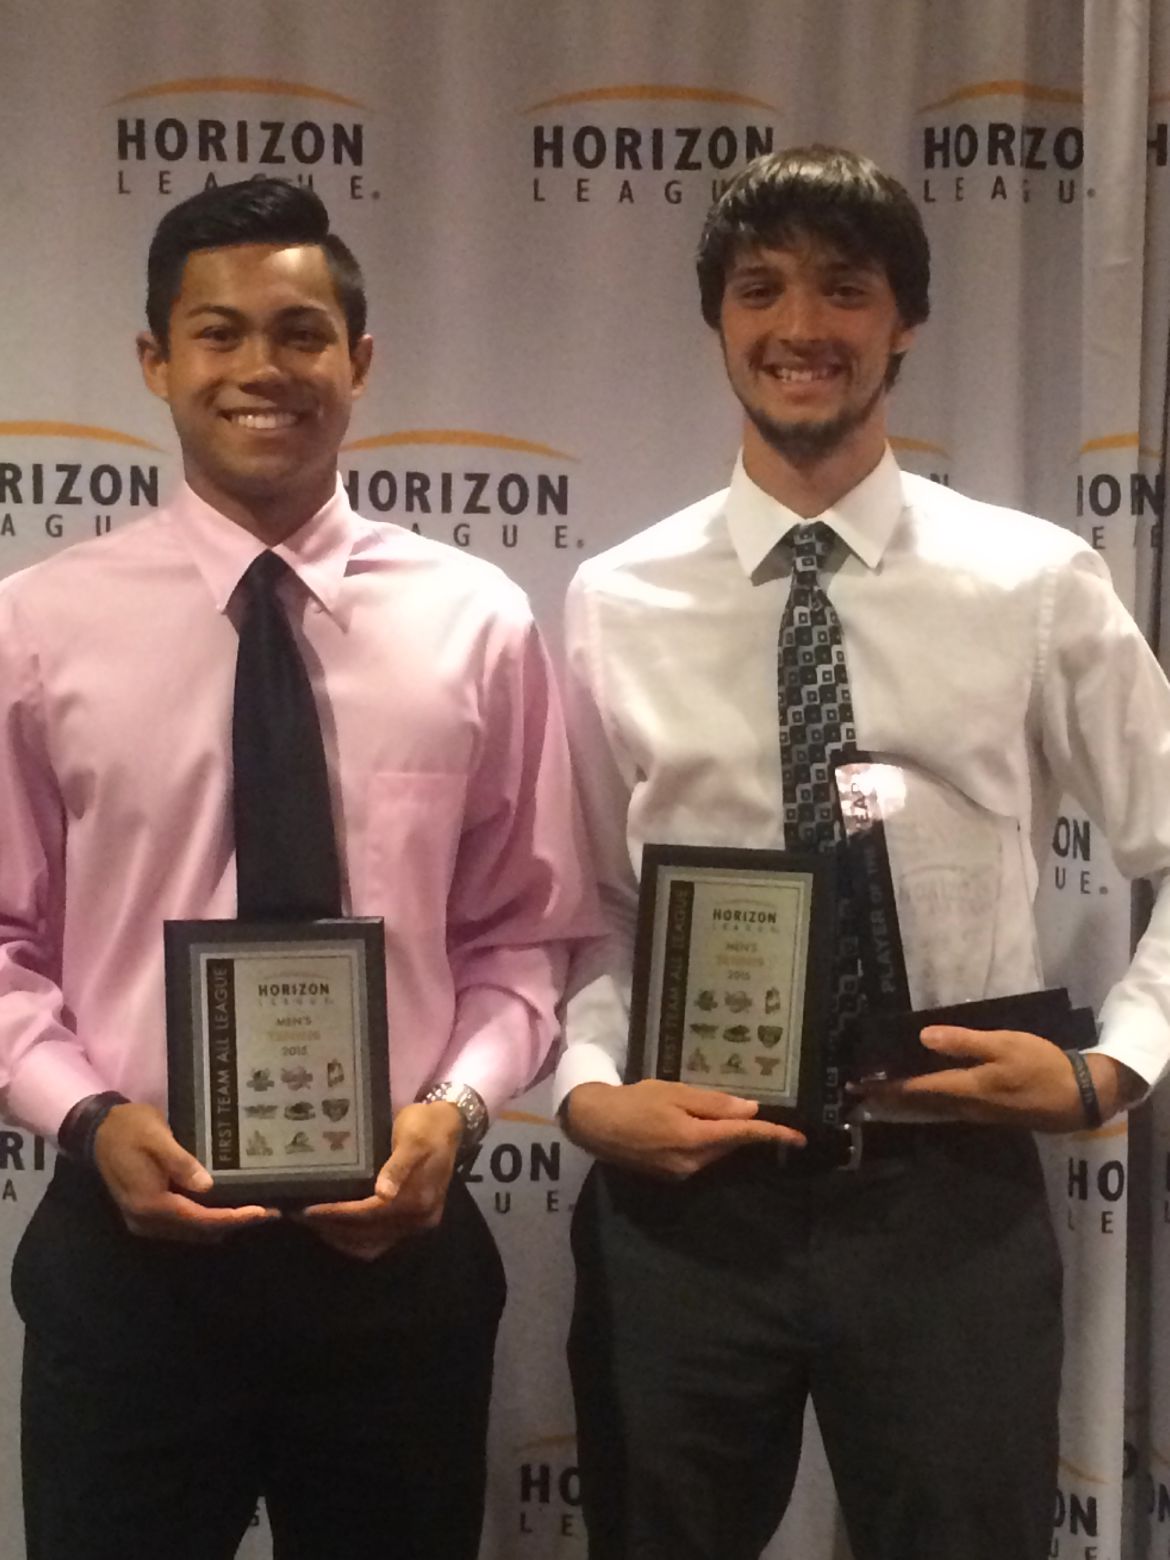 Sophomore Jeffrey Schorsch and Dave Bacalla accepted their awards at the Horizon League Championship banquet in West Lafayette on Thursday evening.